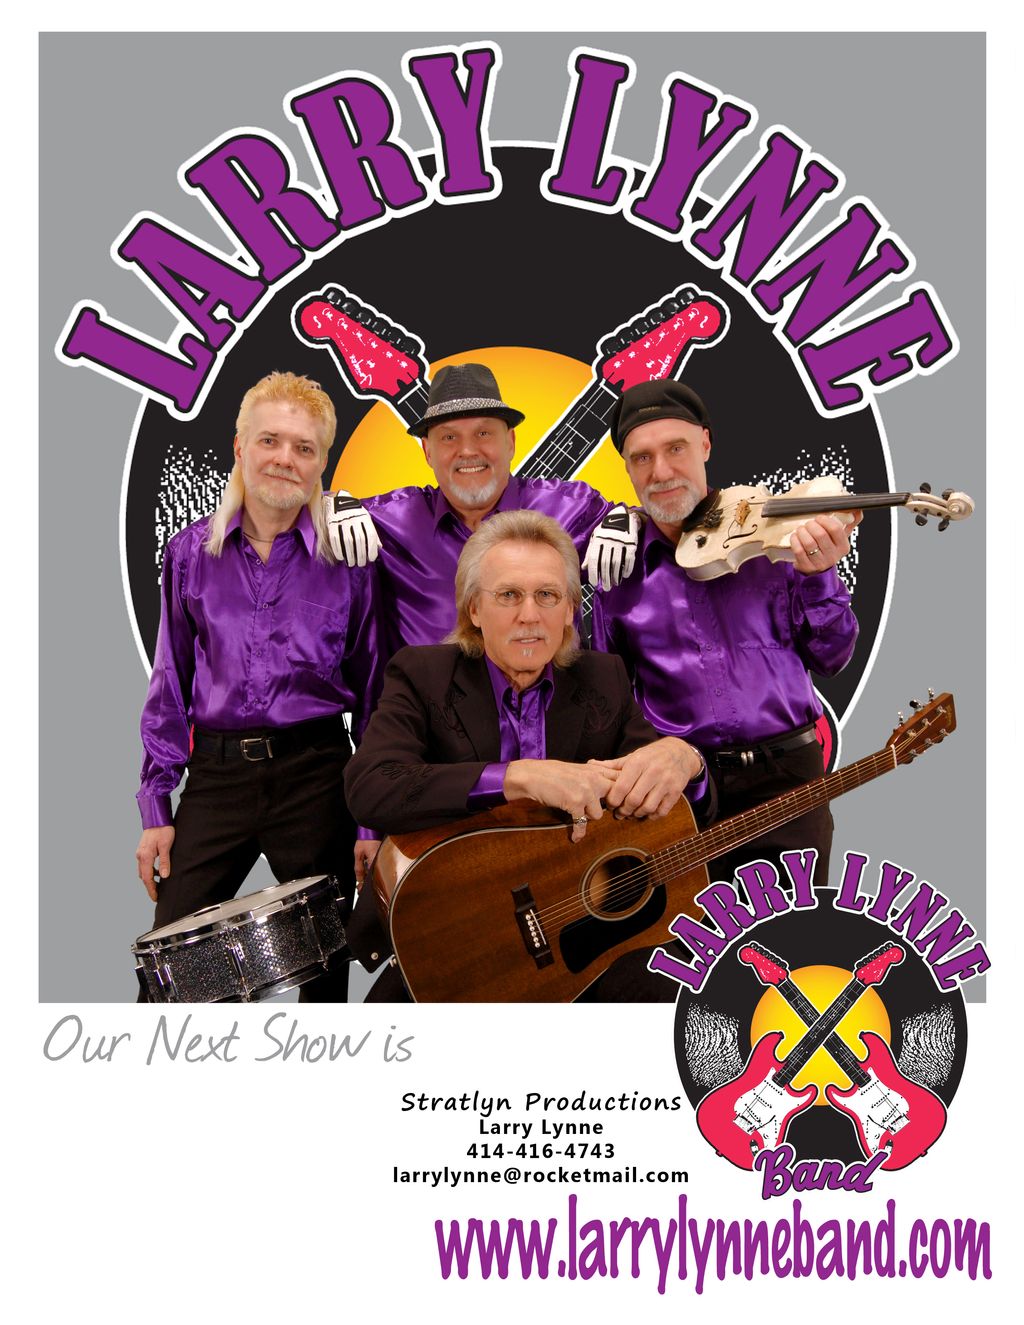 The Larry Lynne Band